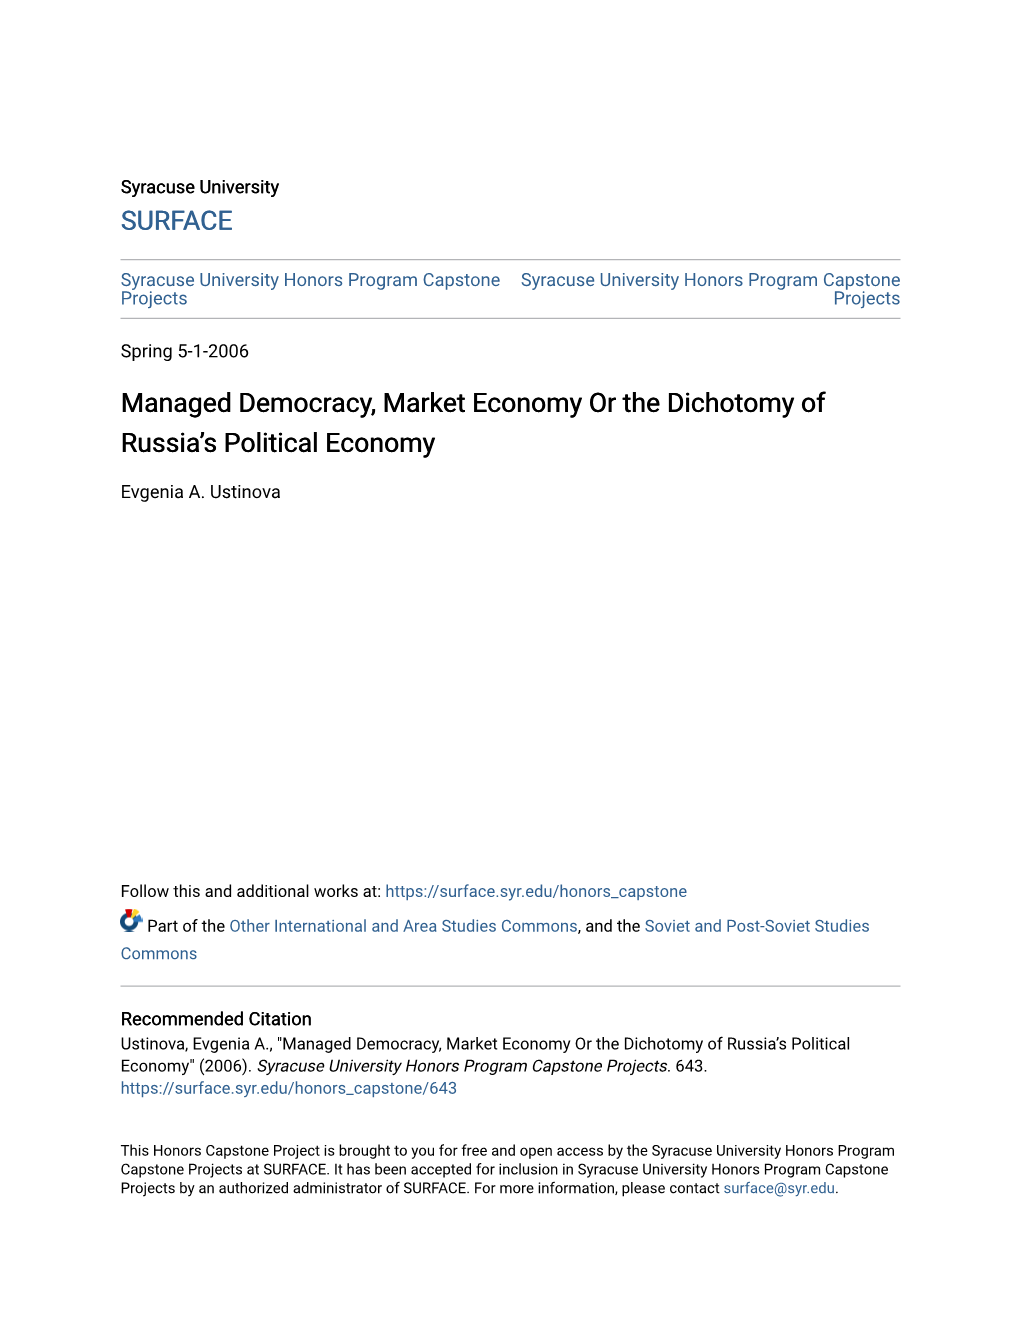 Managed Democracy, Market Economy Or the Dichotomy of Russia’S Political Economy